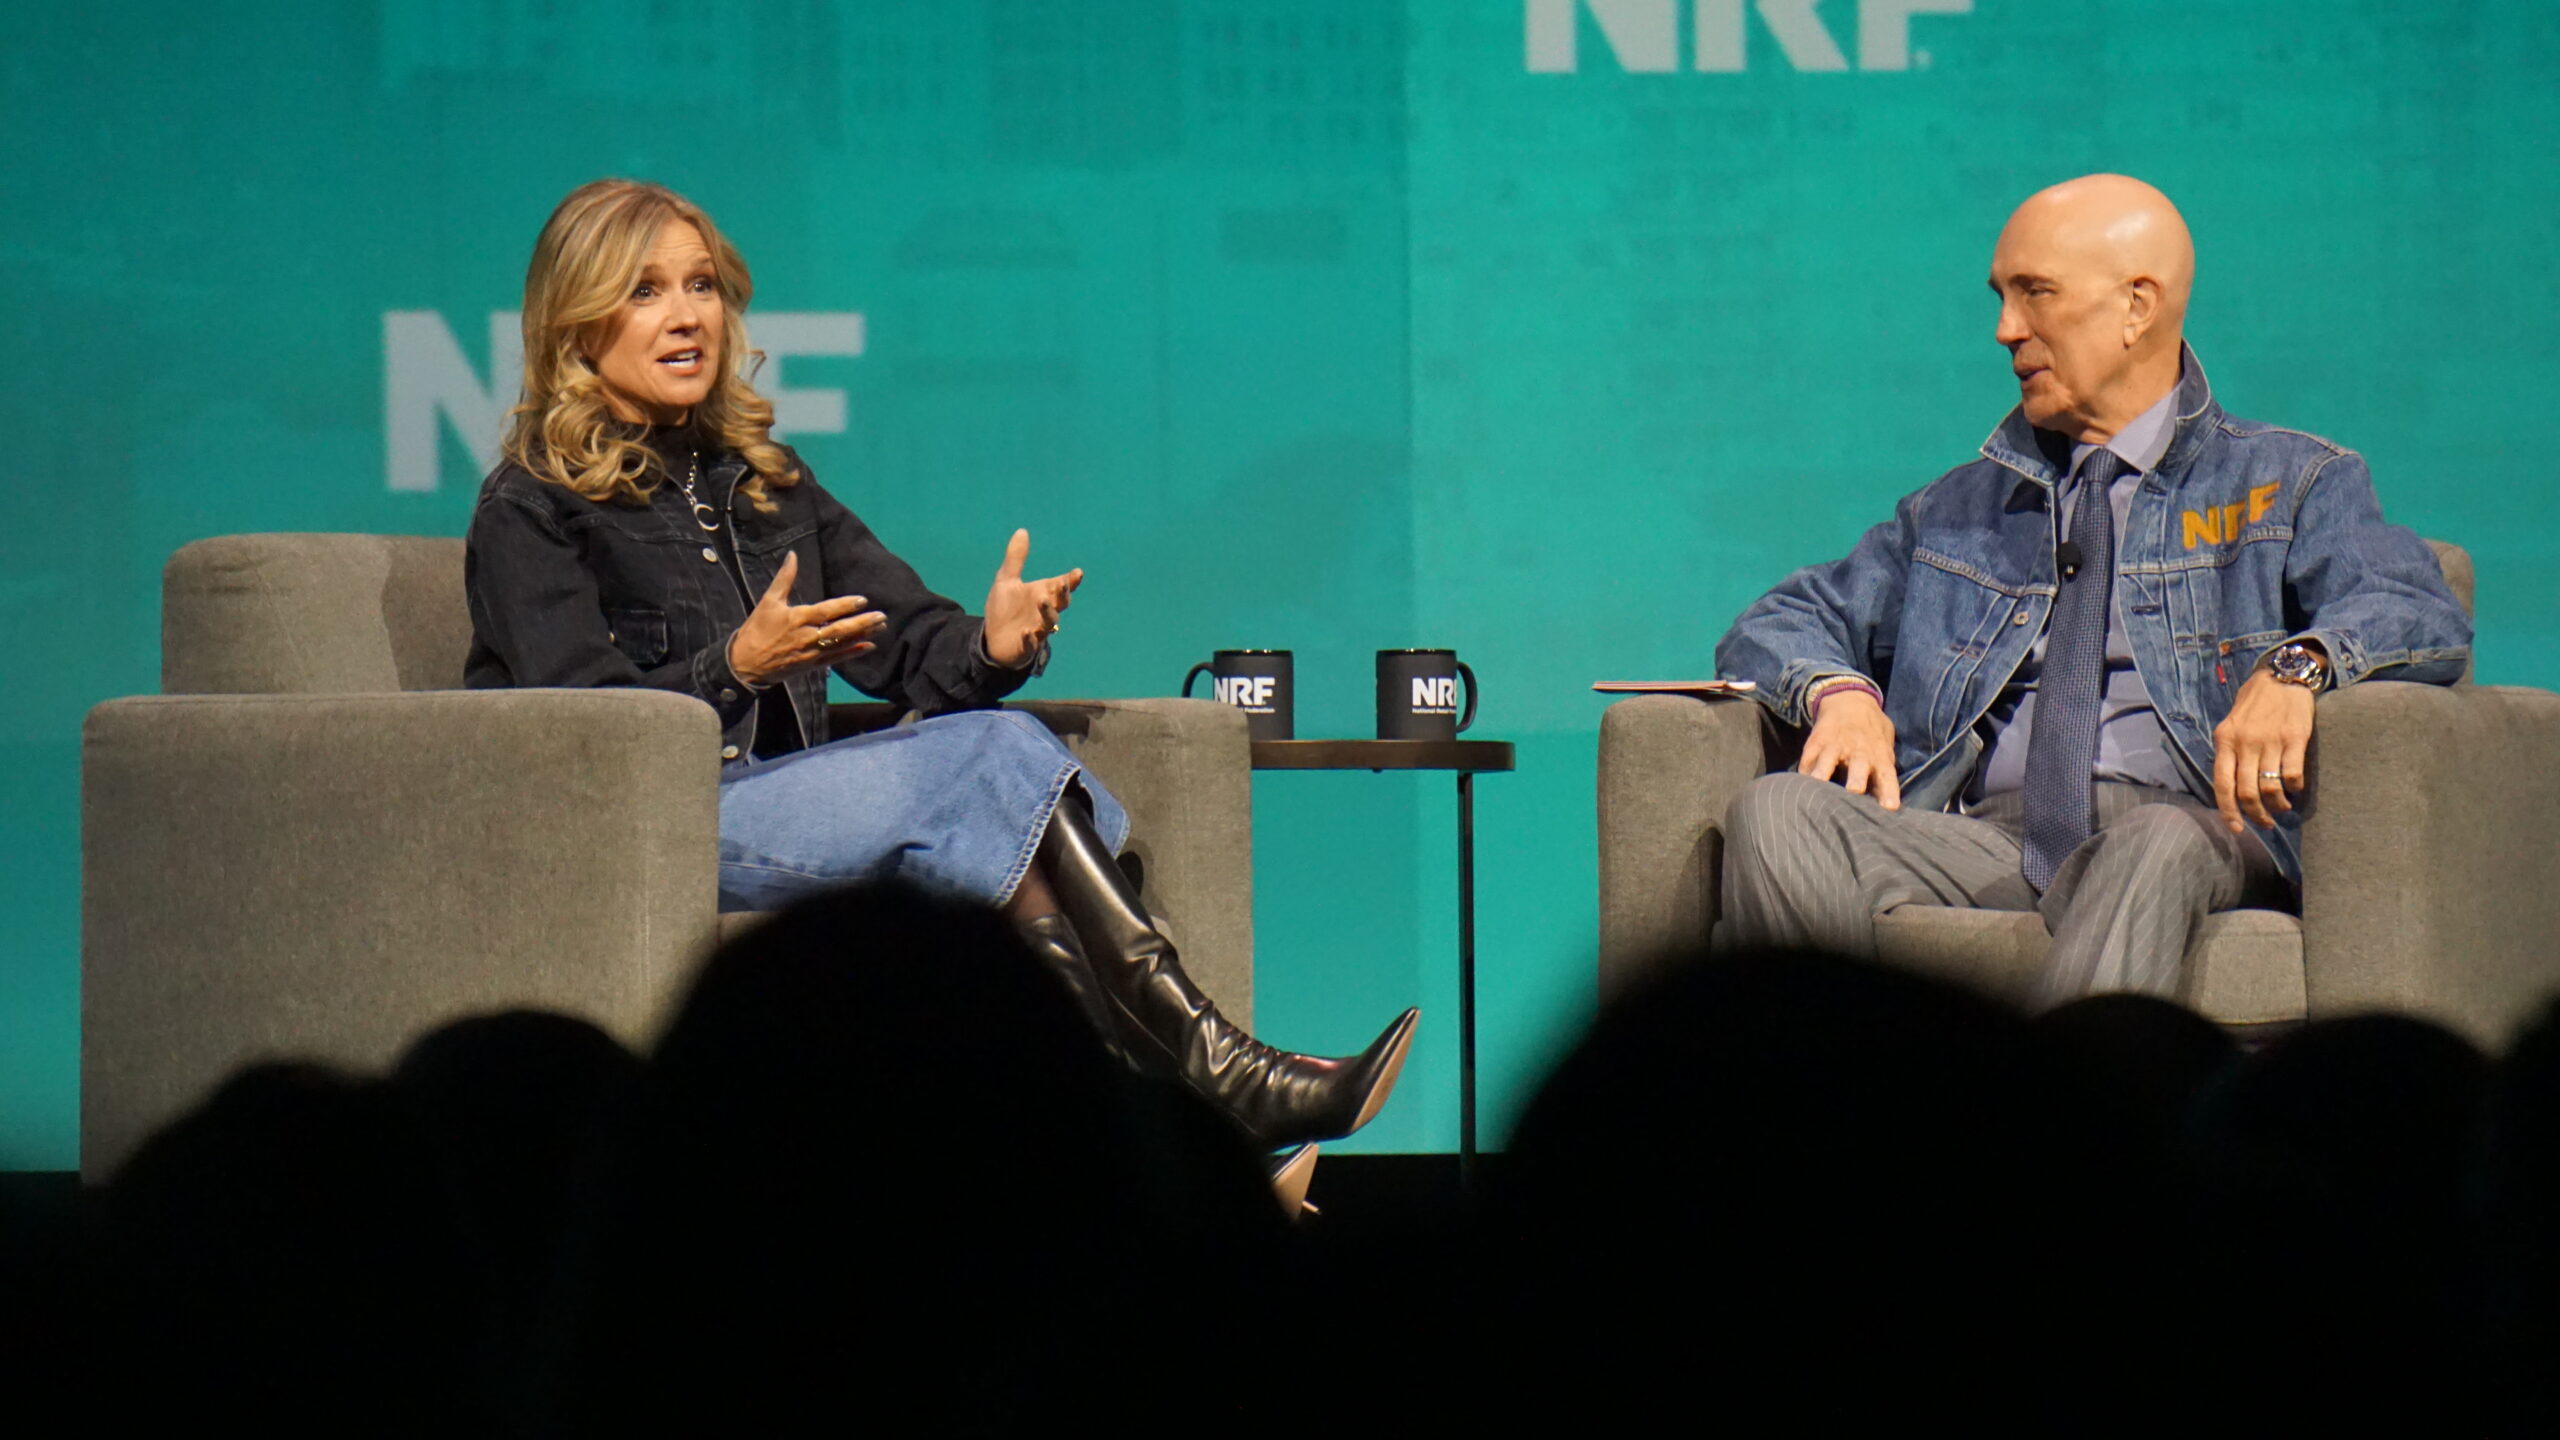 Levi's incoming CEO and NRF CEO interview at NRF 2024: Retail's Big Show